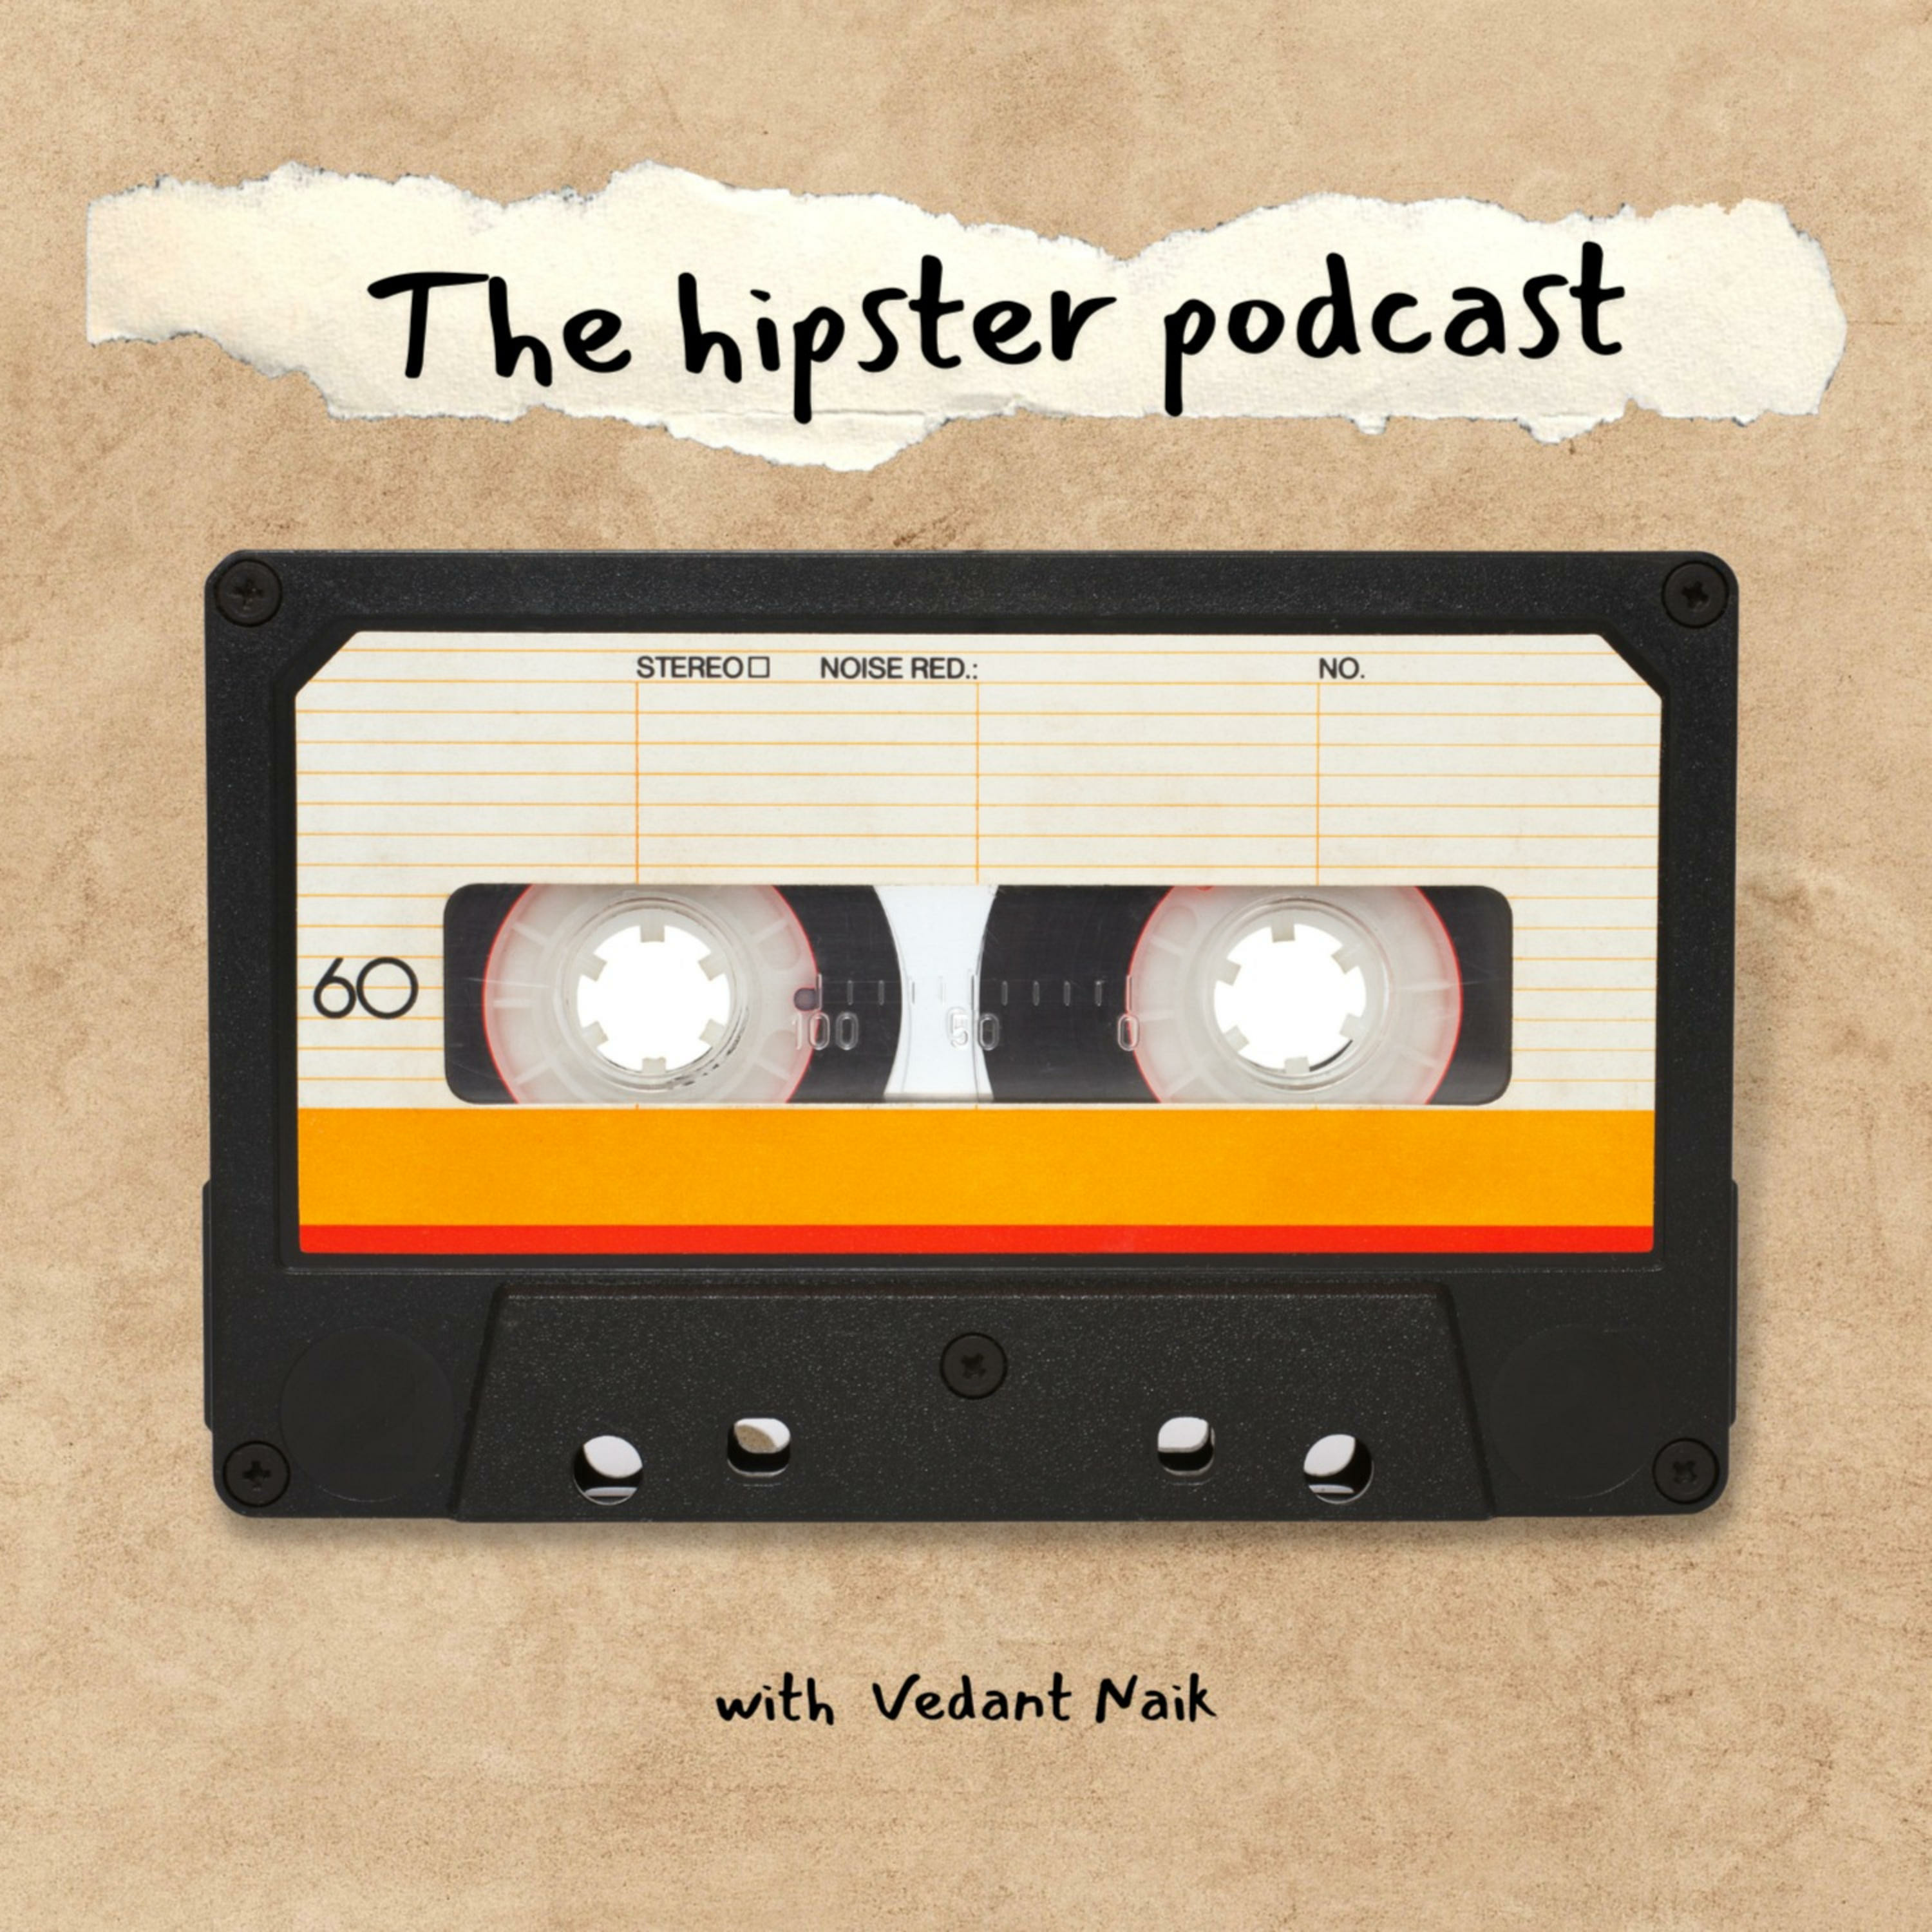 The Hipster Podcast